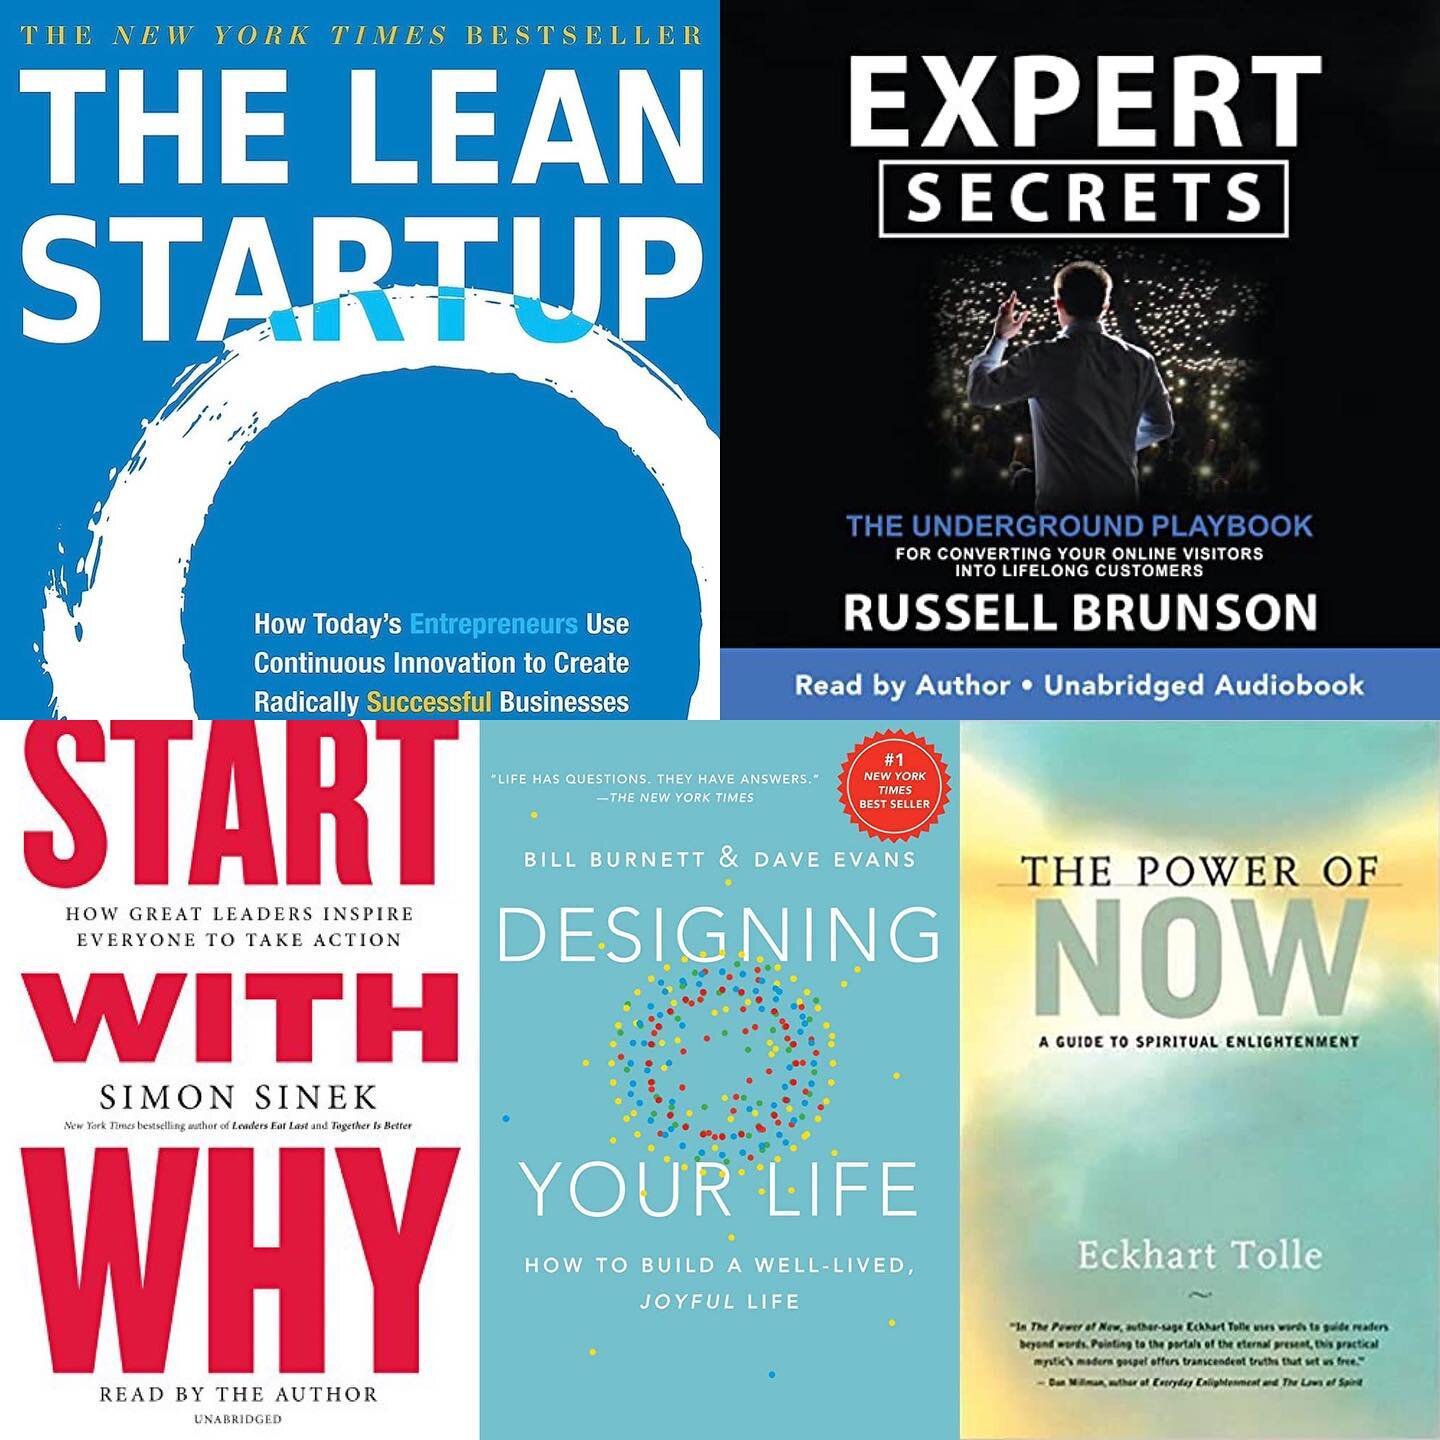 Here are my top 5 favorite books that fundamentally change my mindset and to start creating my own life while refining success!

What are your top 5?

Booklinks

Start with why - https://www.amazon.com/dp/B074VF6ZLM/?tag=880e67-20

Expert Secrets - h